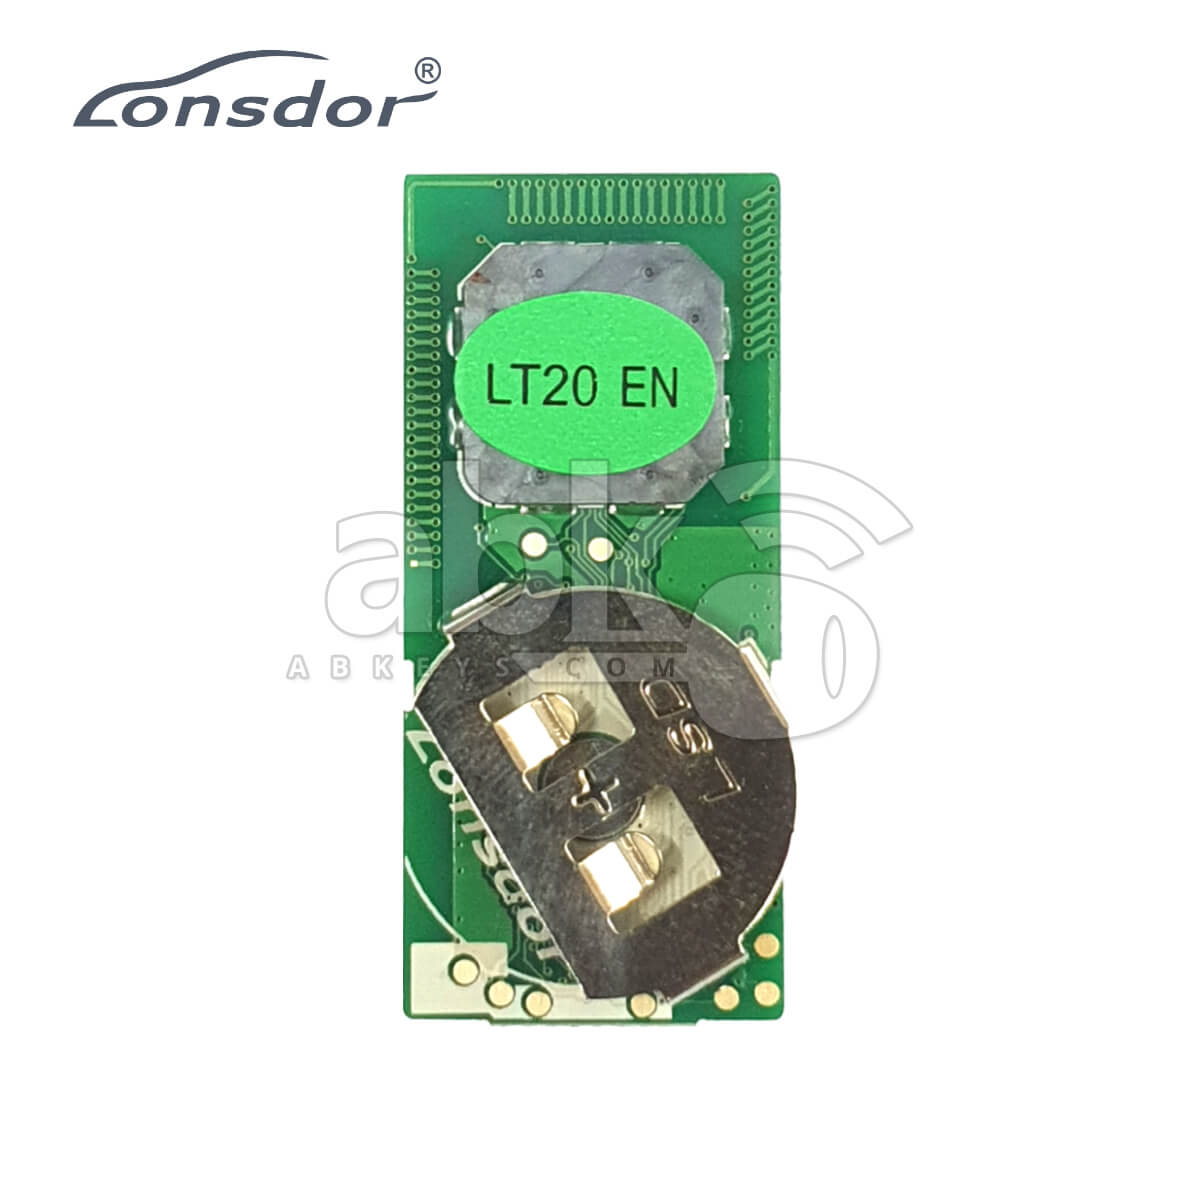 Lonsdor LT20-03 Smart Key PCB 8A+4D For Toyota Adjustable Frequency 5Buttons - ABK-2888-LT20-03 -